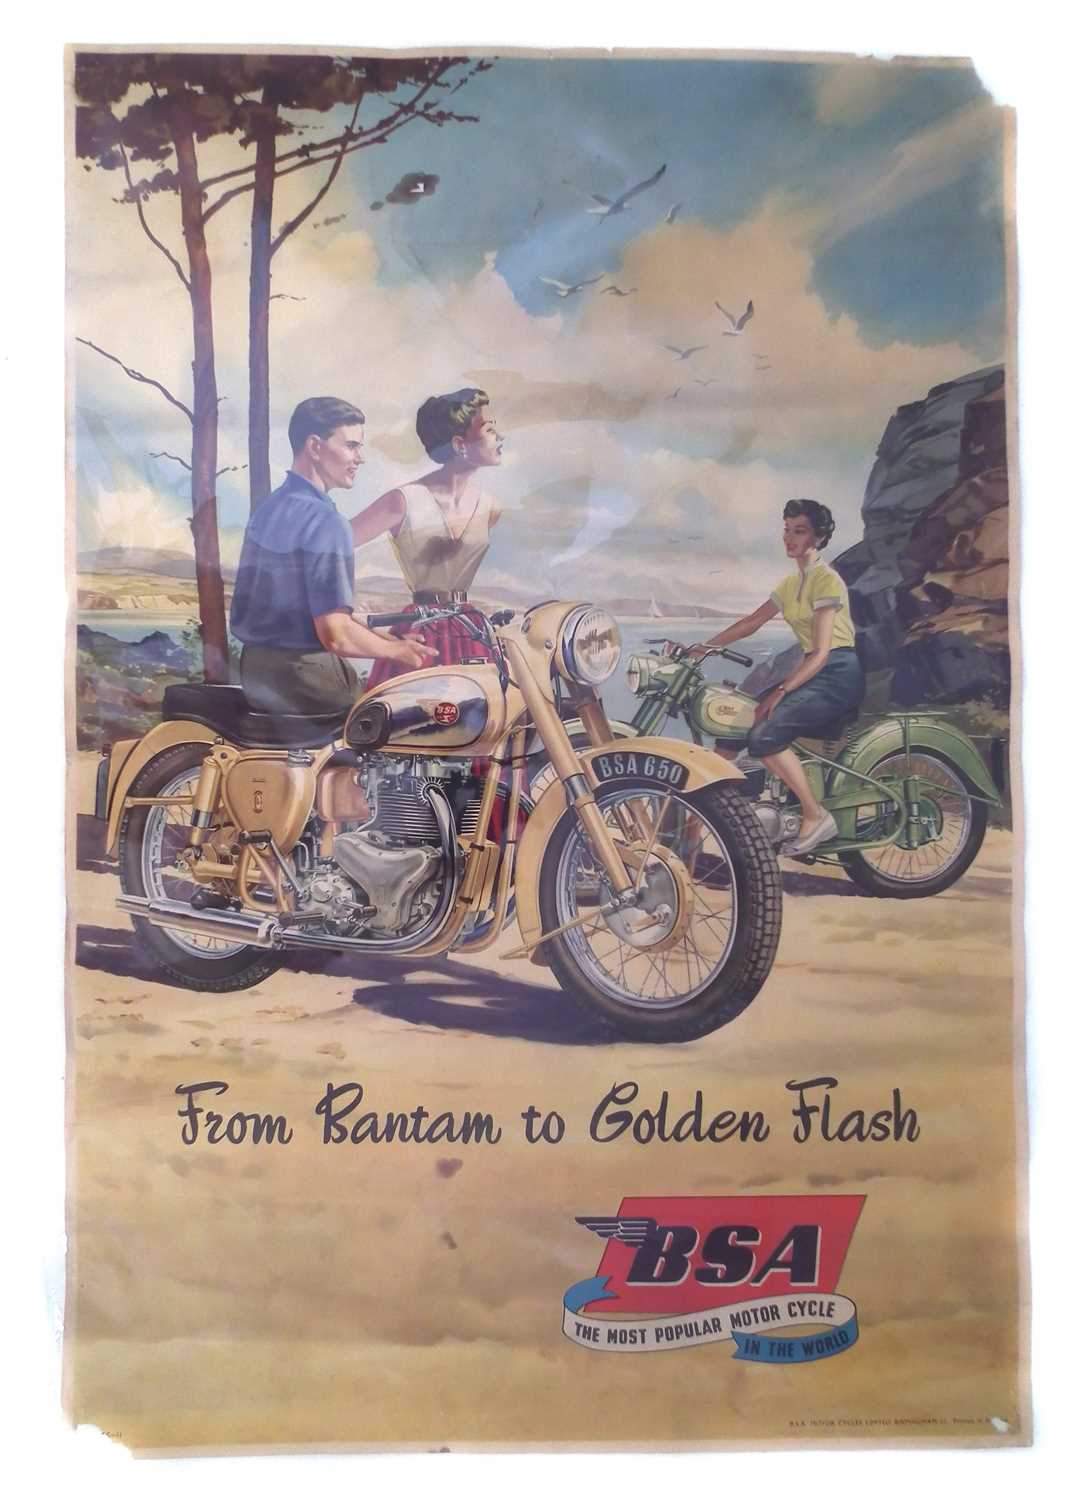 Lot 125 - BSA promotion poster "From Bantam to Golden Flash" depicting two BSA motorcycles, 74cm (29") x 50cm (20").